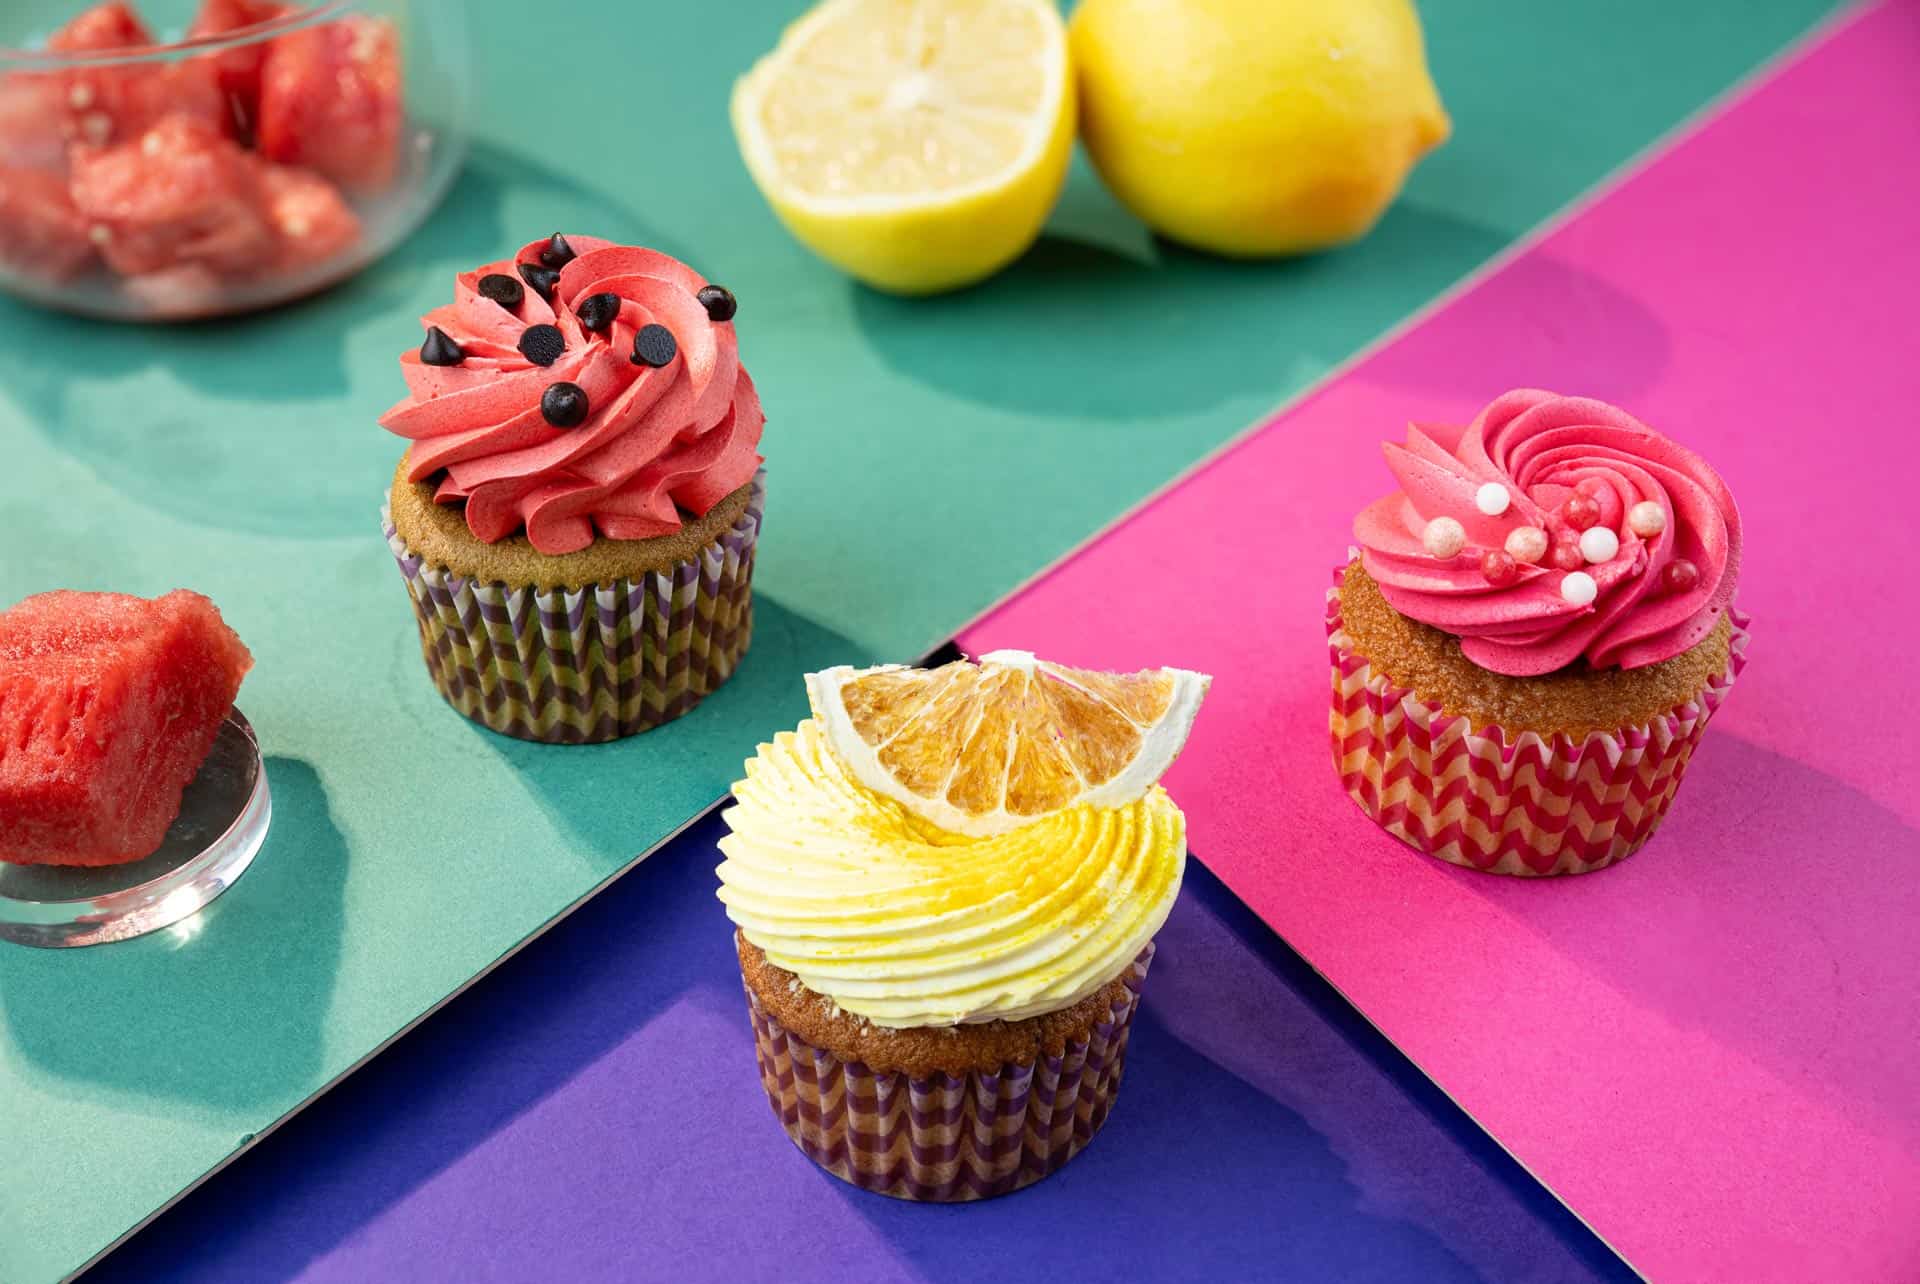 Twelve Cupcakes New Cupcakes Selection Fun, Bright Colours and Cute Cupcakes